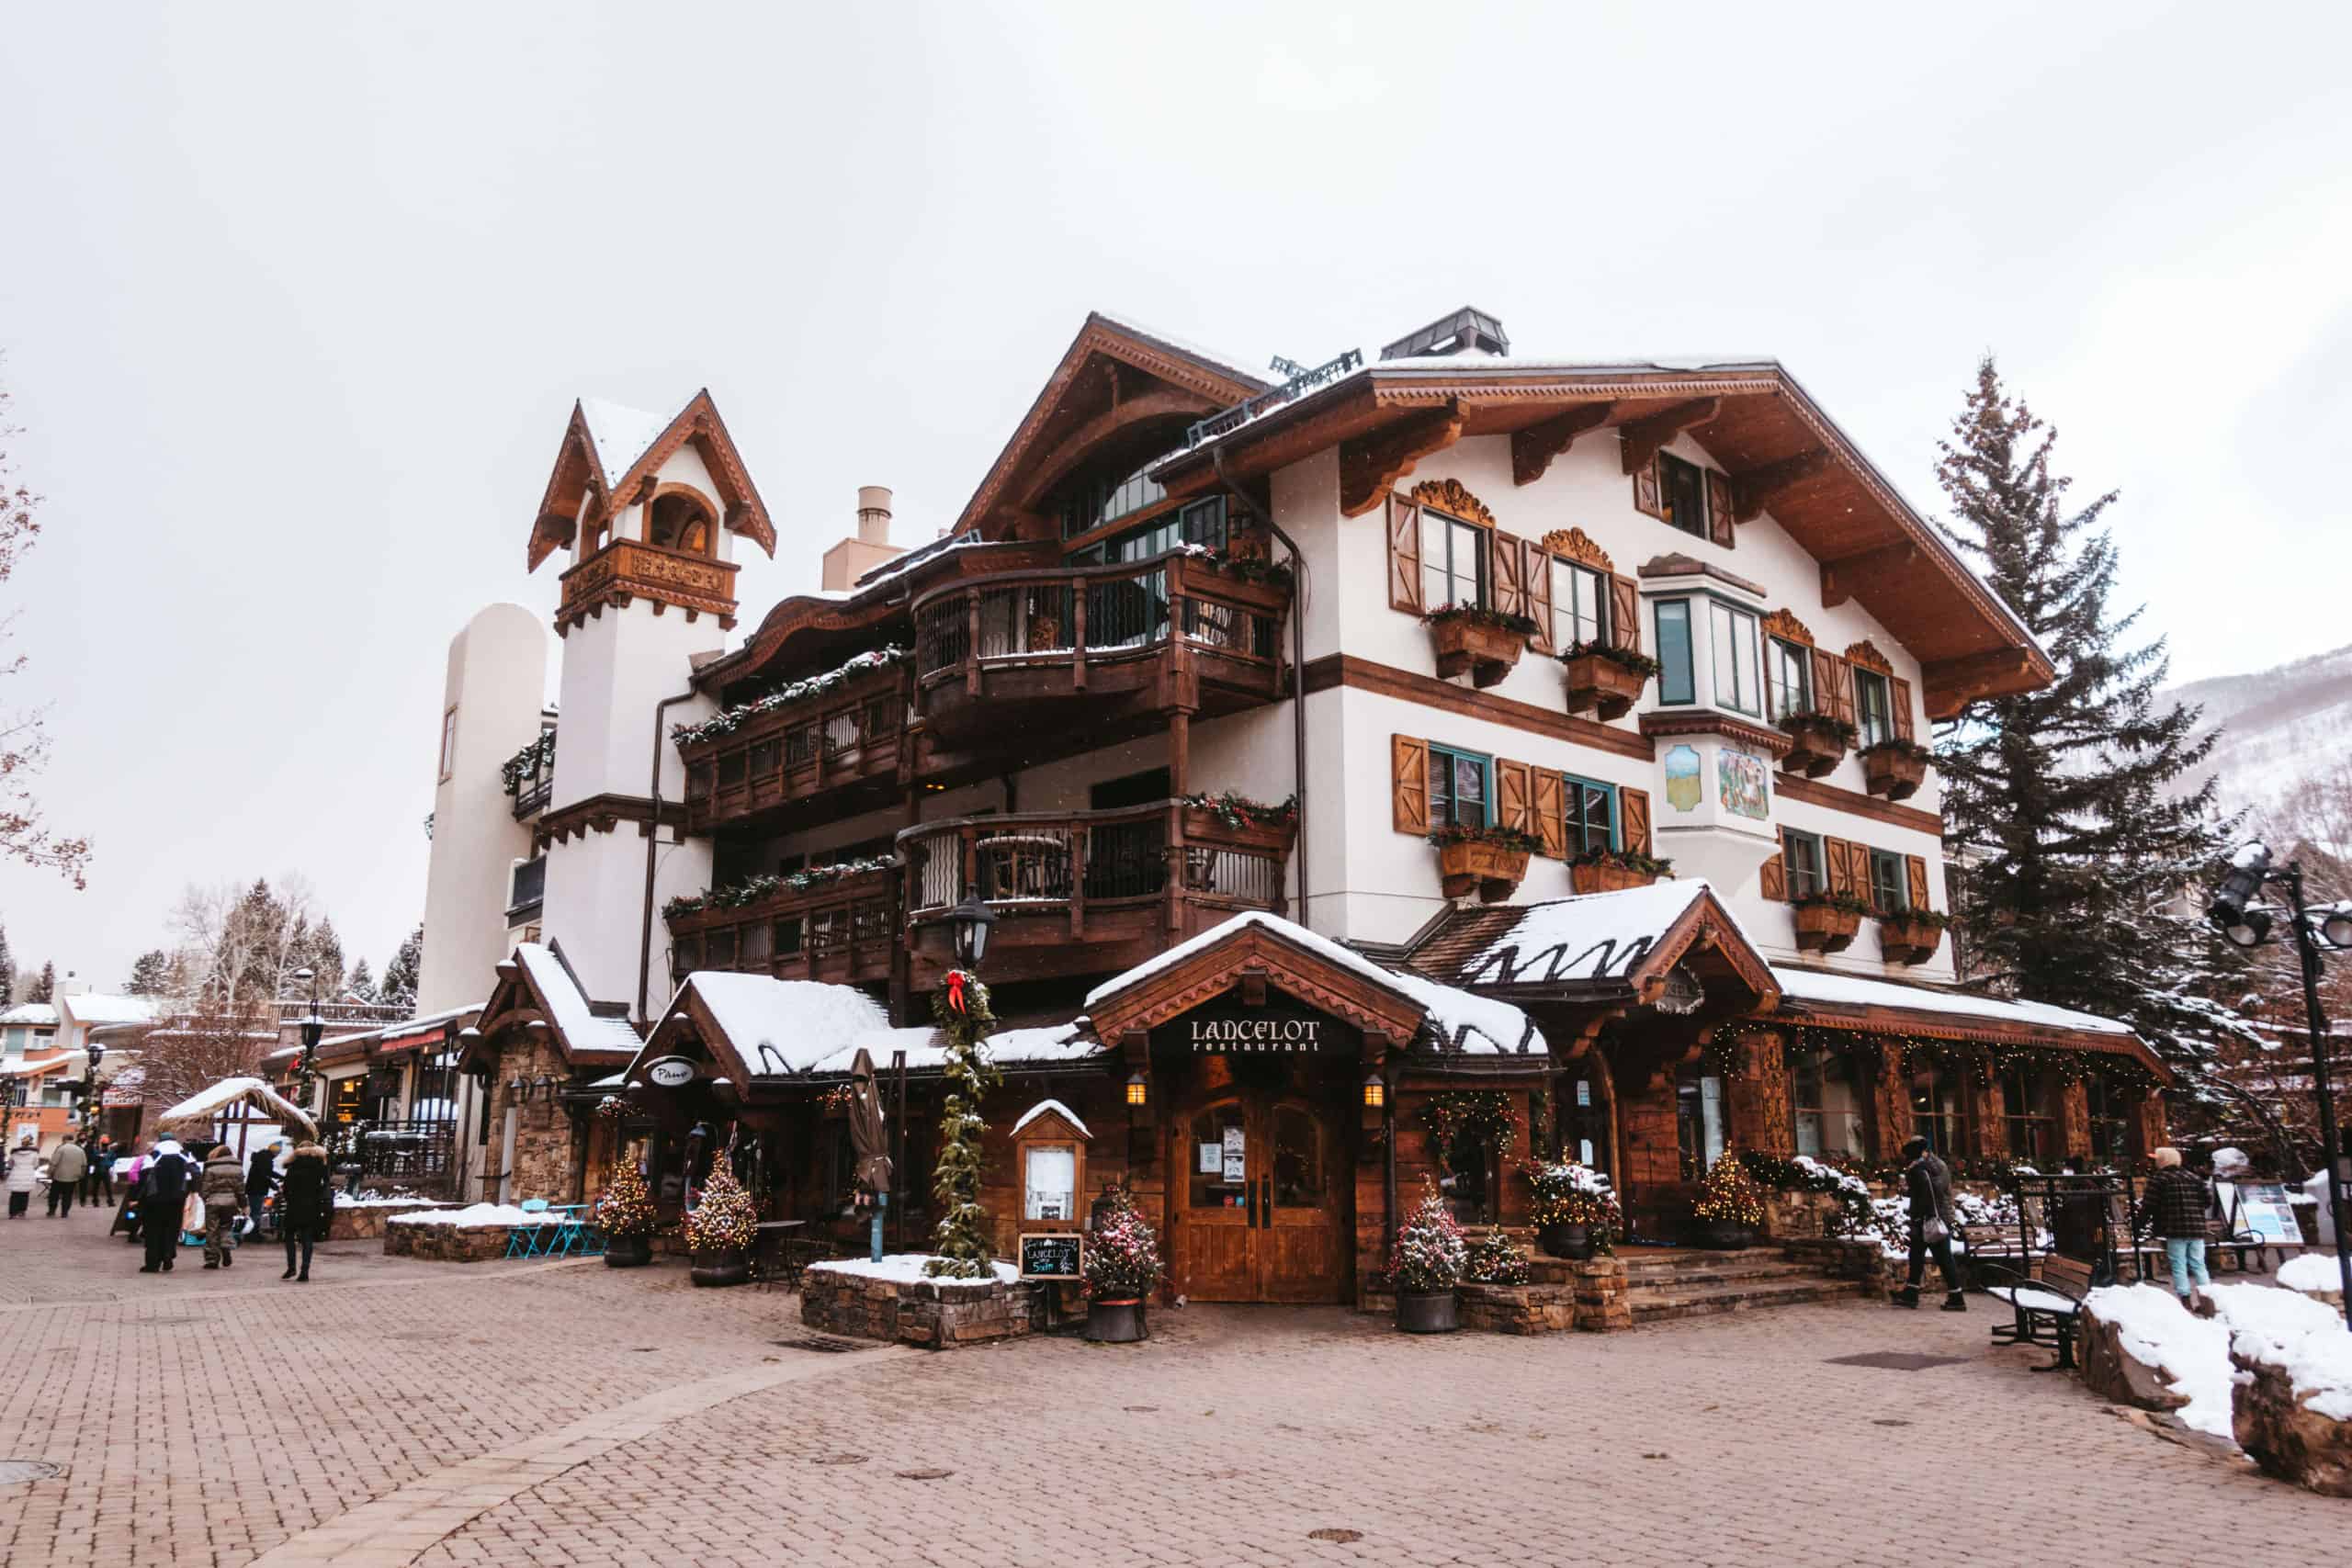 Charming buildings in Vail Village | The Ultimate Guide to Vail, Colorado